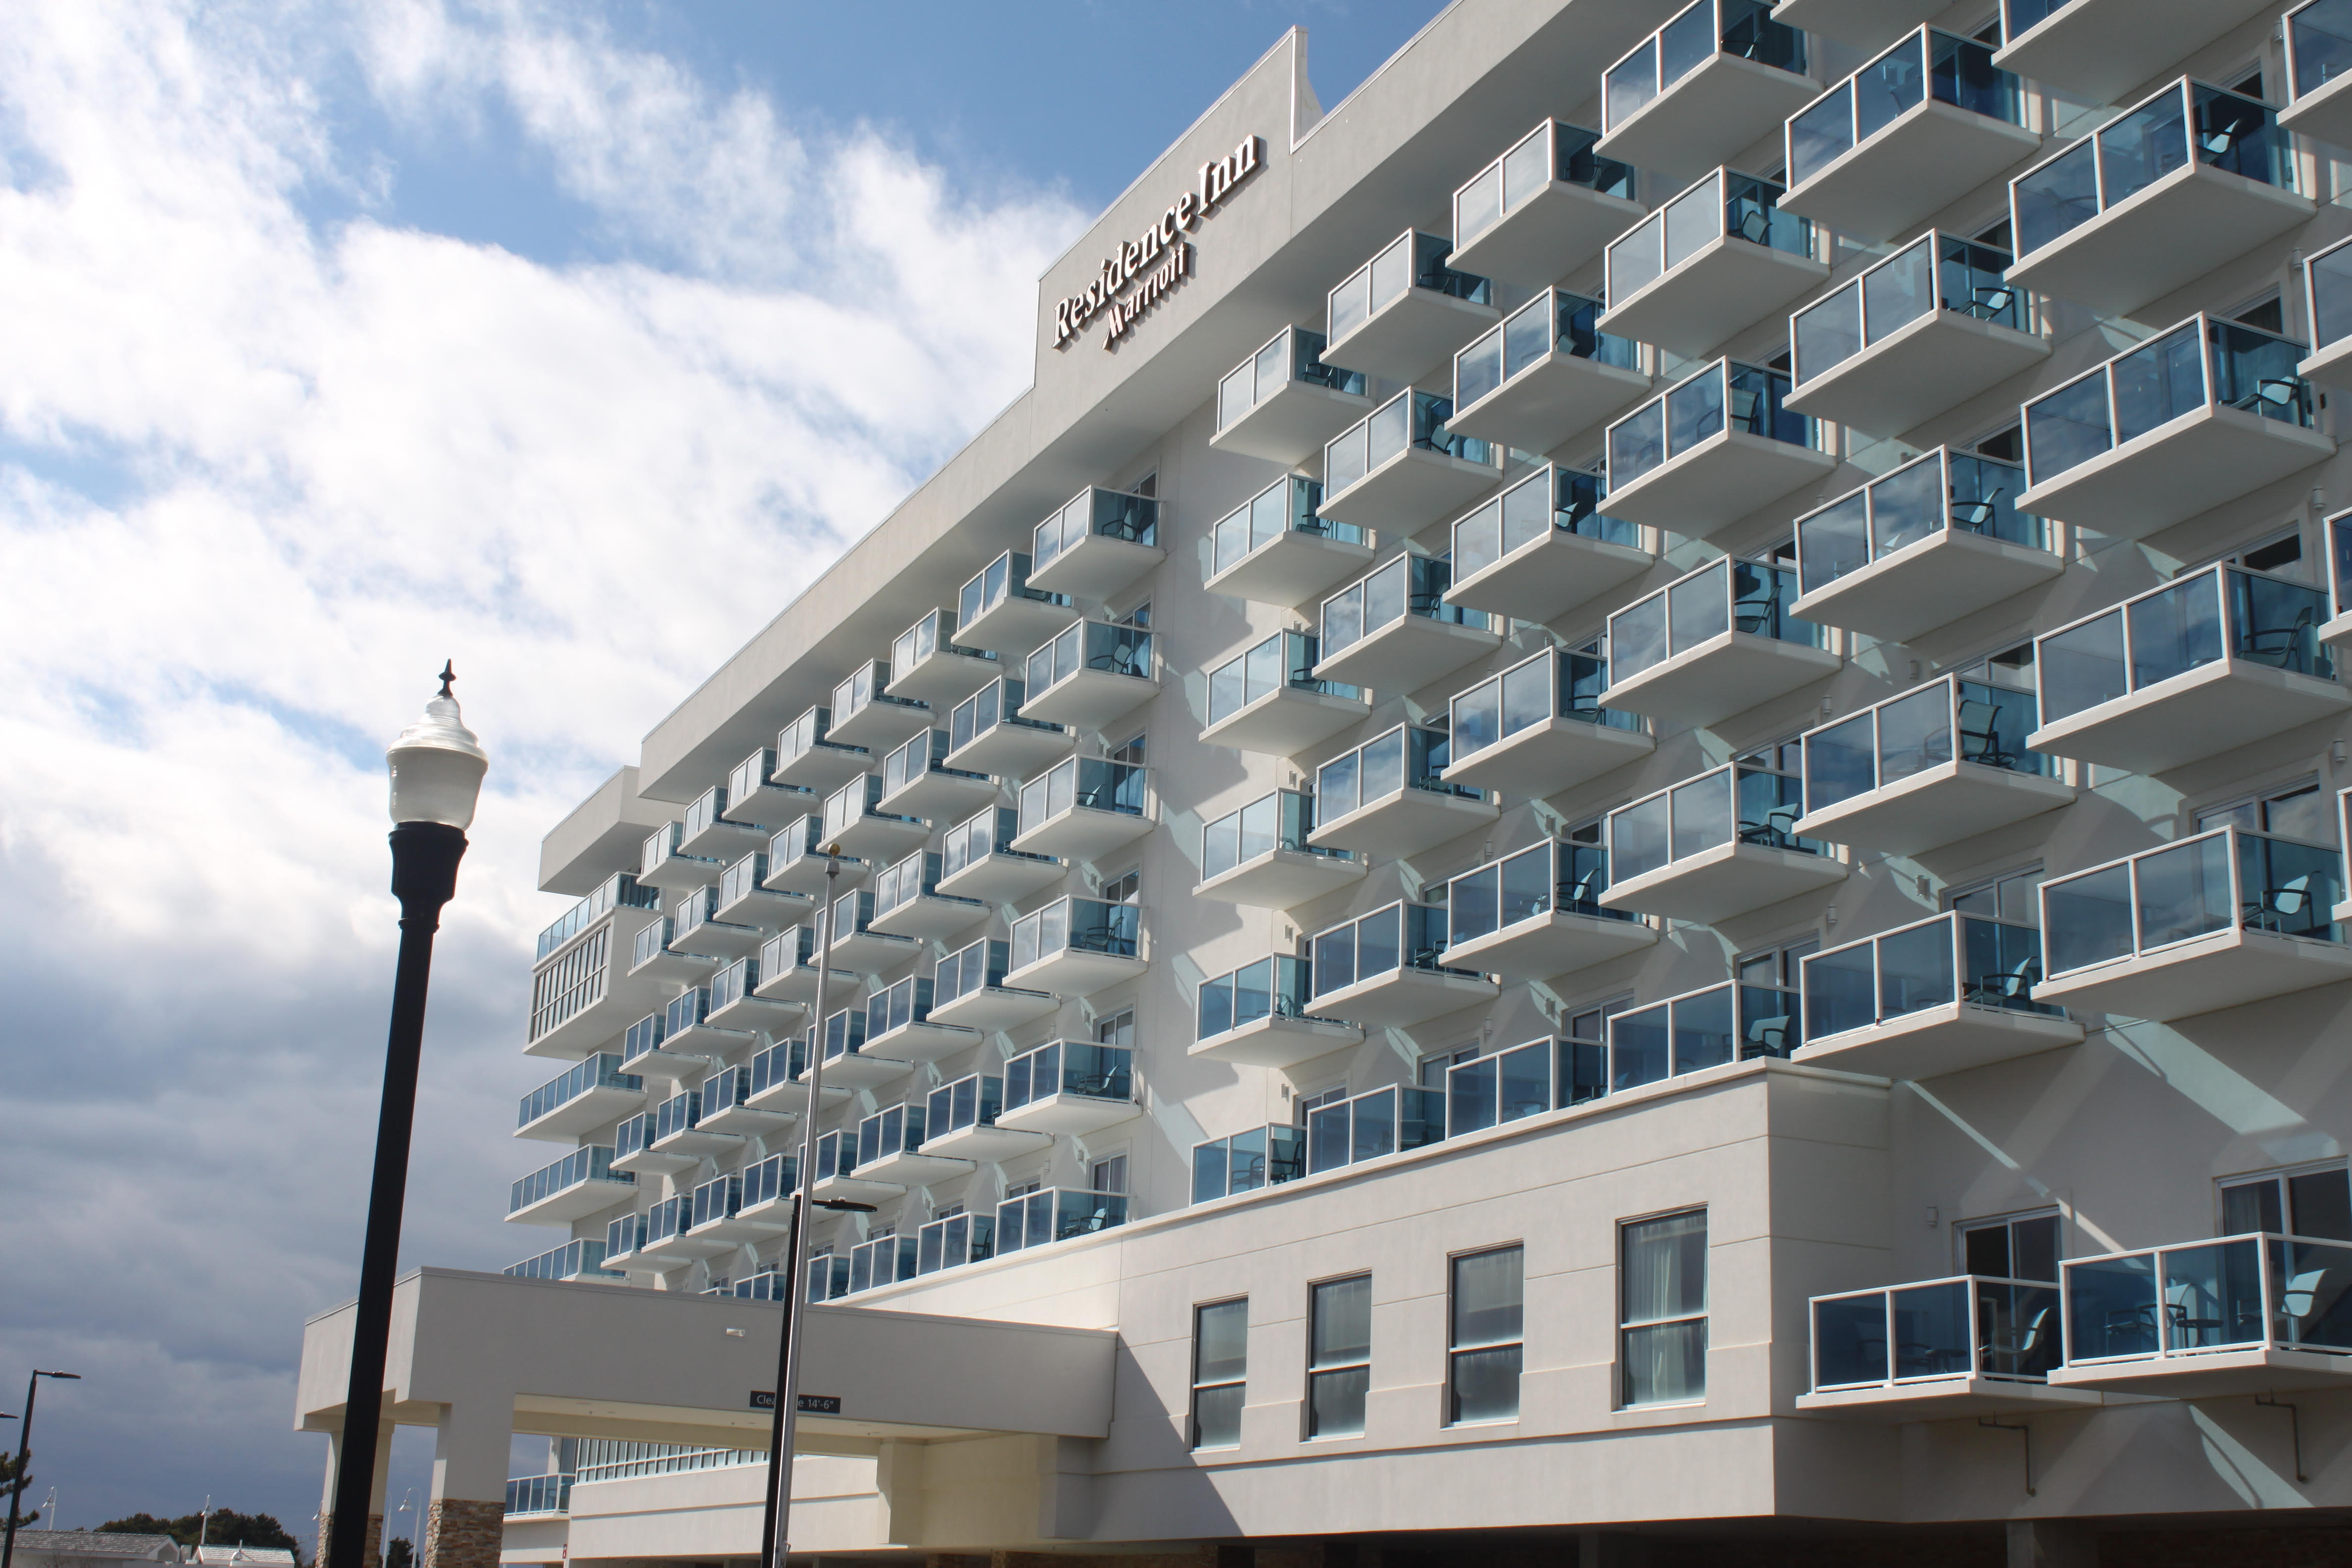 The all-suite Residence Inn Ocean City will operate as a Marriott franchise owned by Inns of Ocean City and managed by Palme